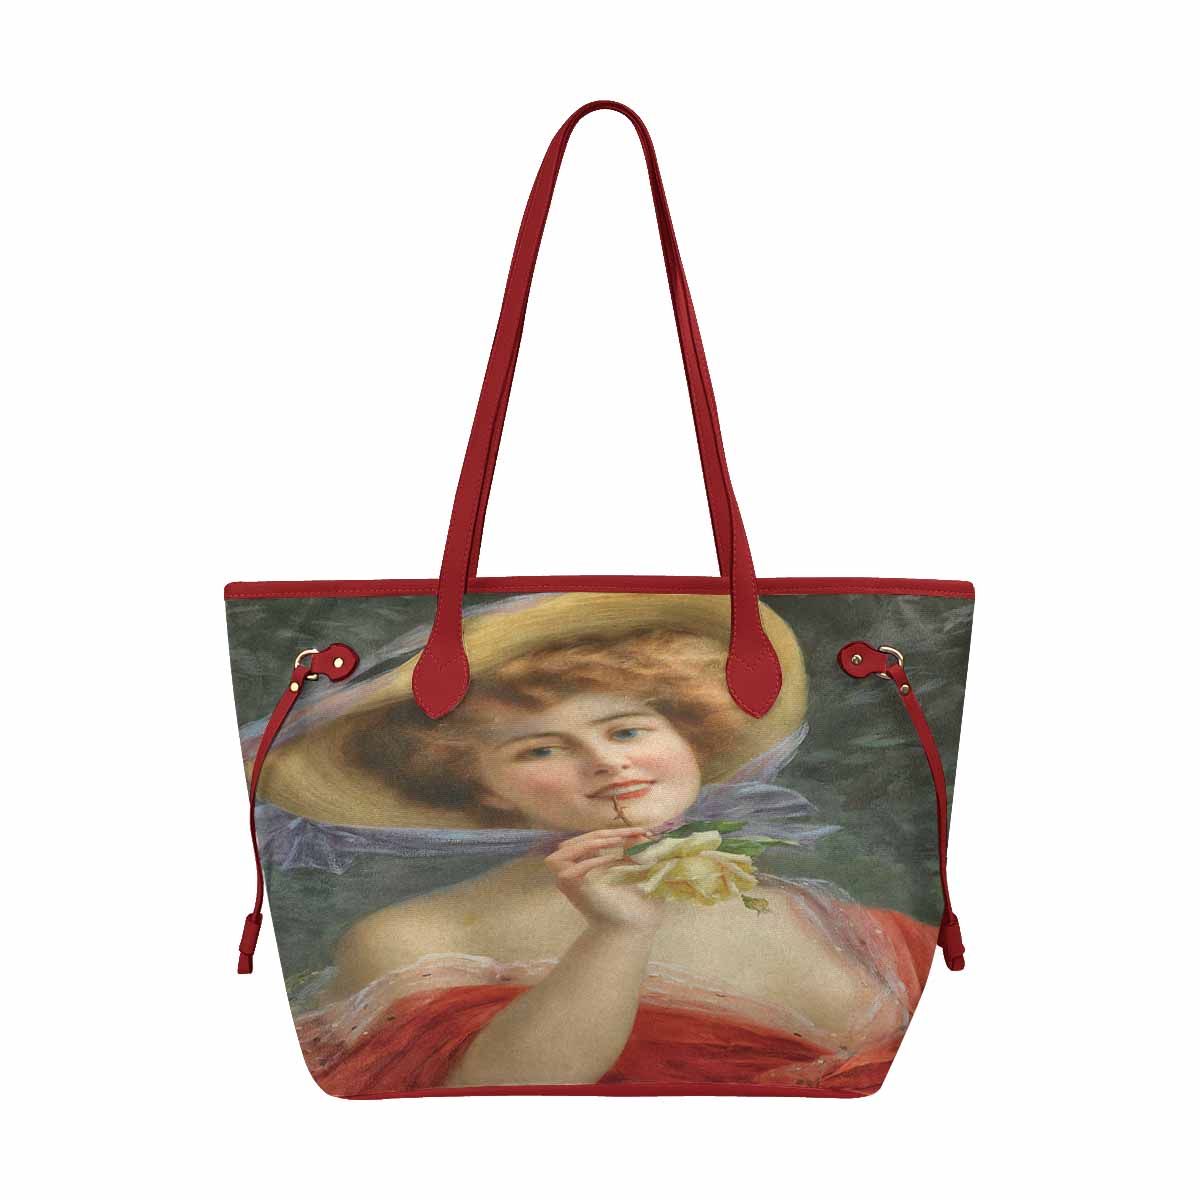 Victorian Lady Design Handbag, Model 1695361, Young Girl With A Rose, RED TRIM